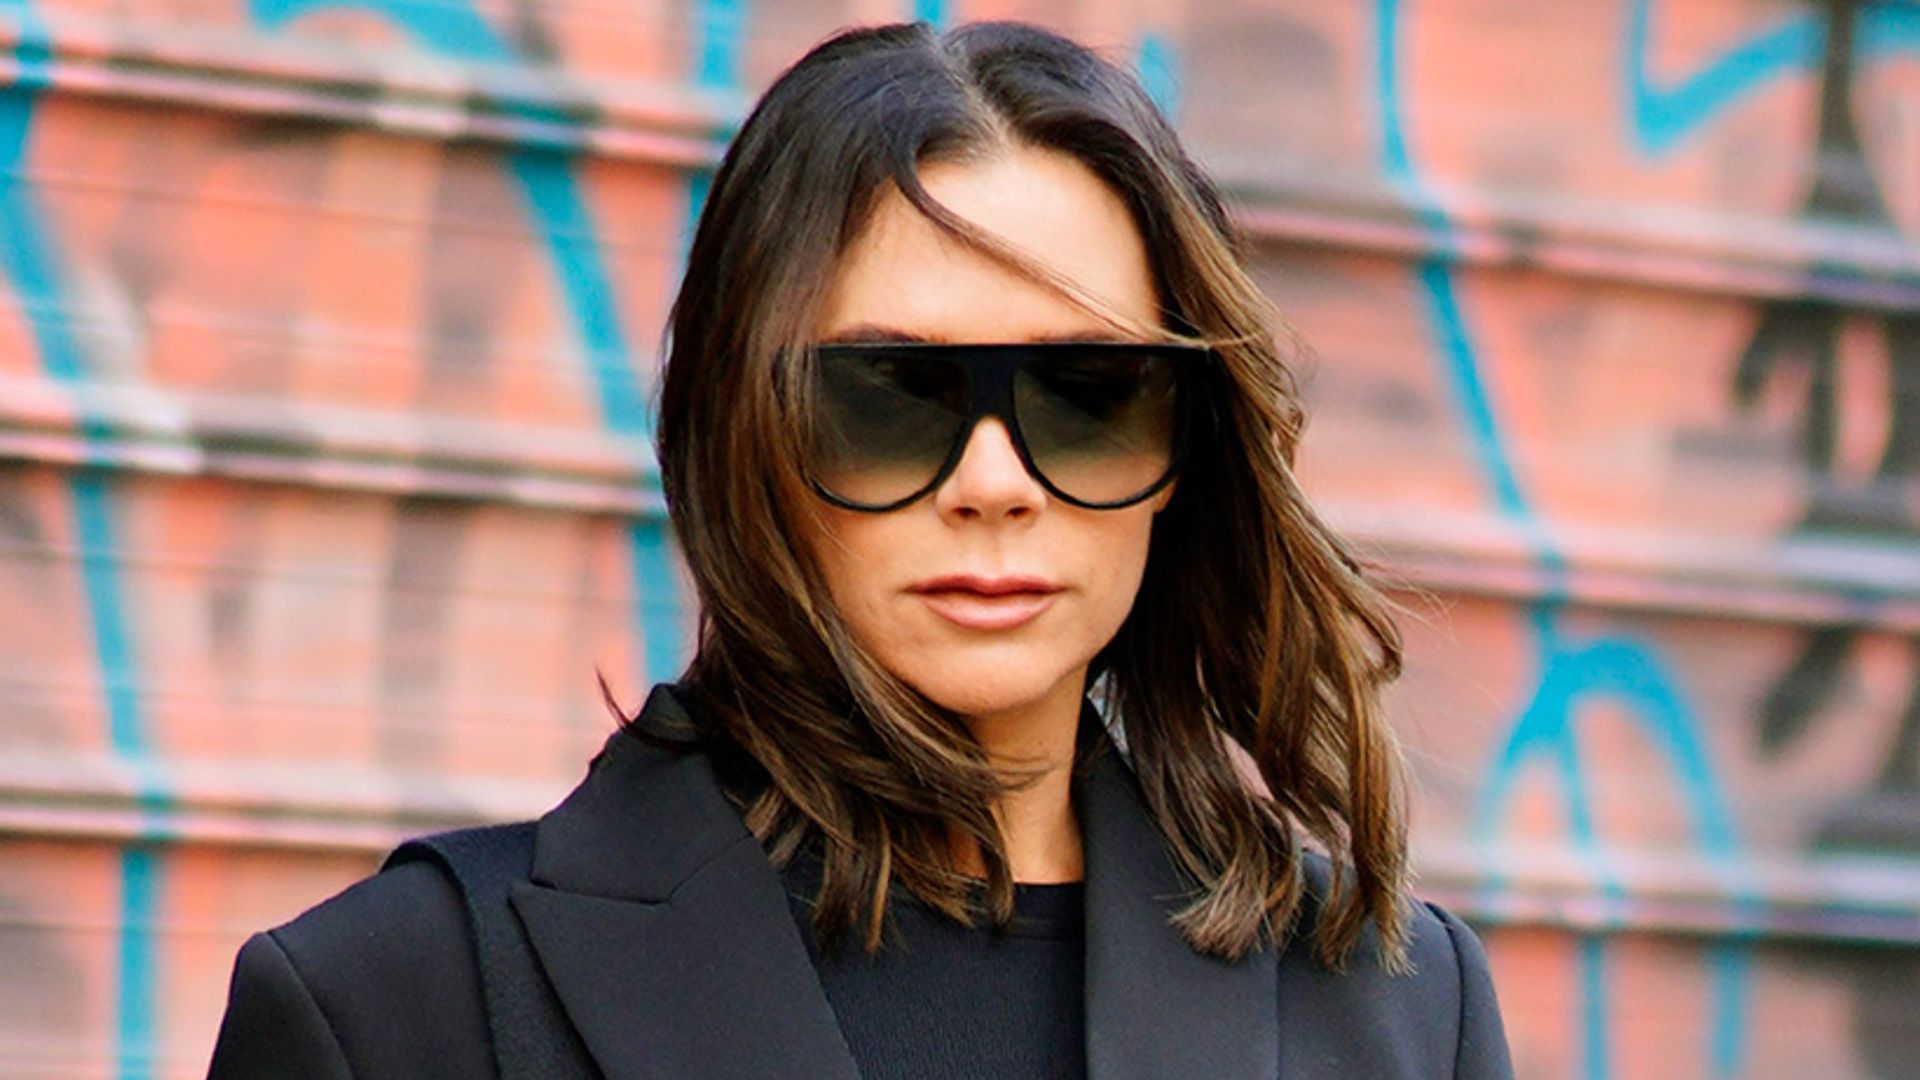 Victoria Beckham debuts a brand new hairstyle that will 